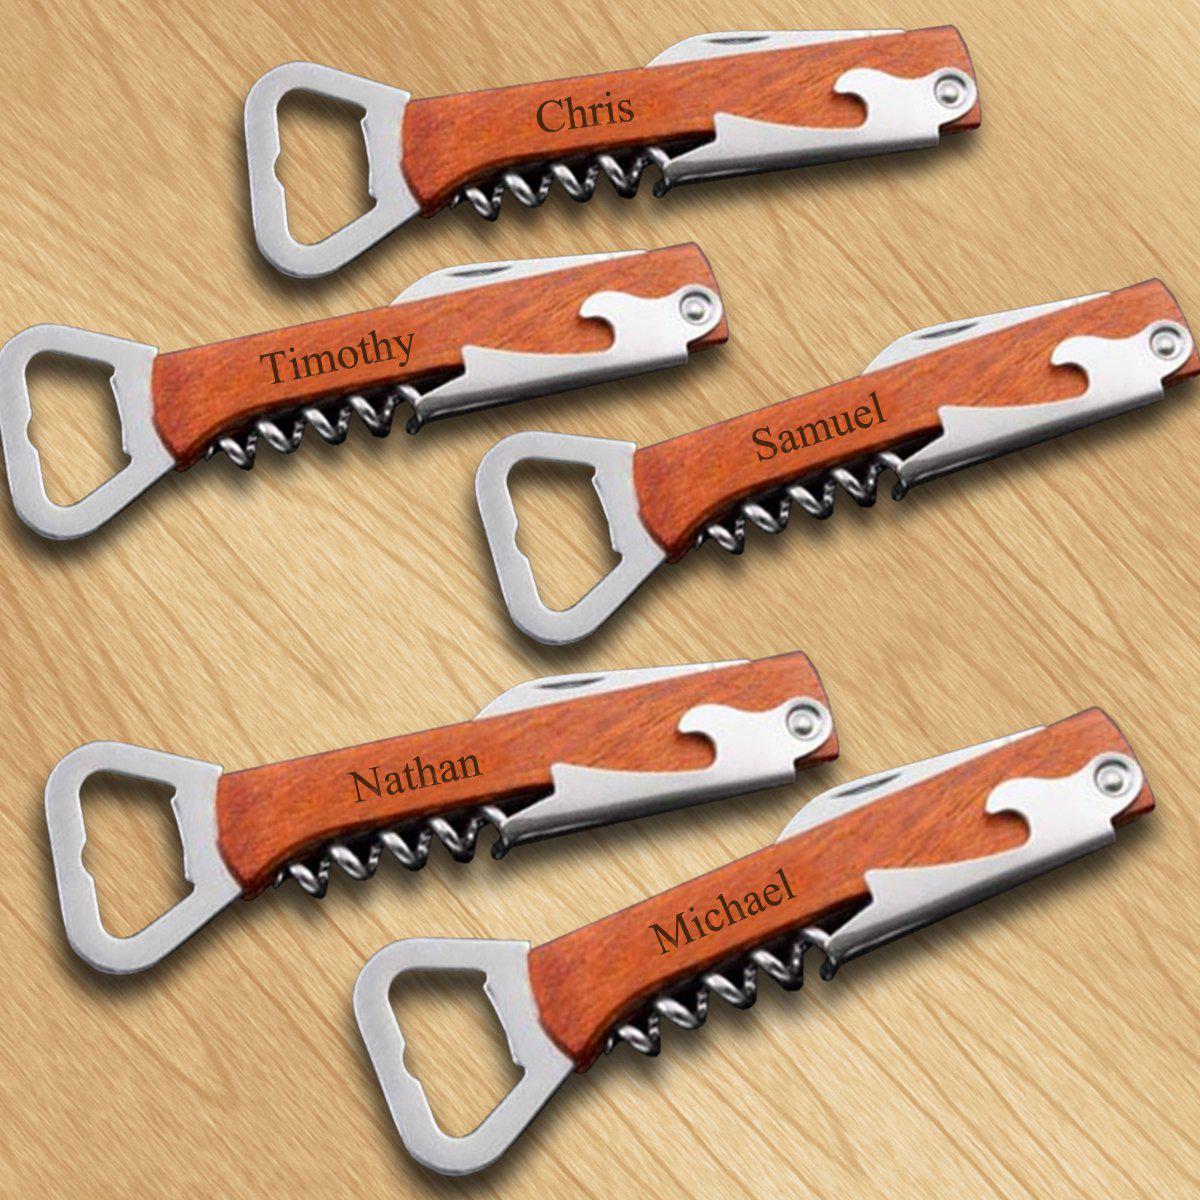 Set of 5 Personalized Wood Handled Wine and Bottle Openers for Groomsmen